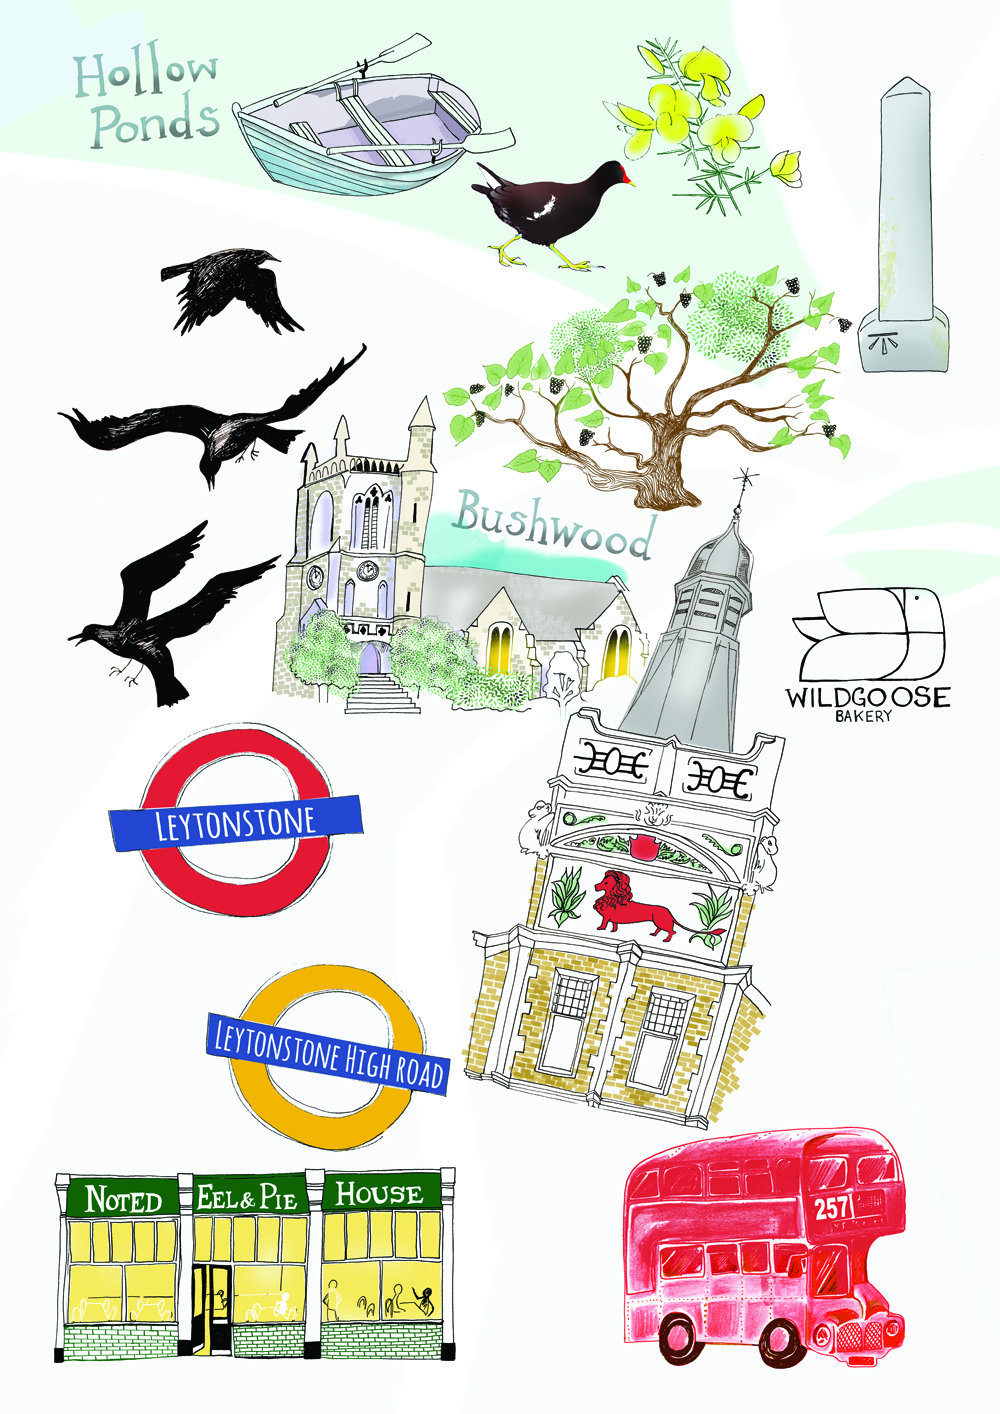 Leytonstone illustration used in area guide by Trading Places Estate Agency